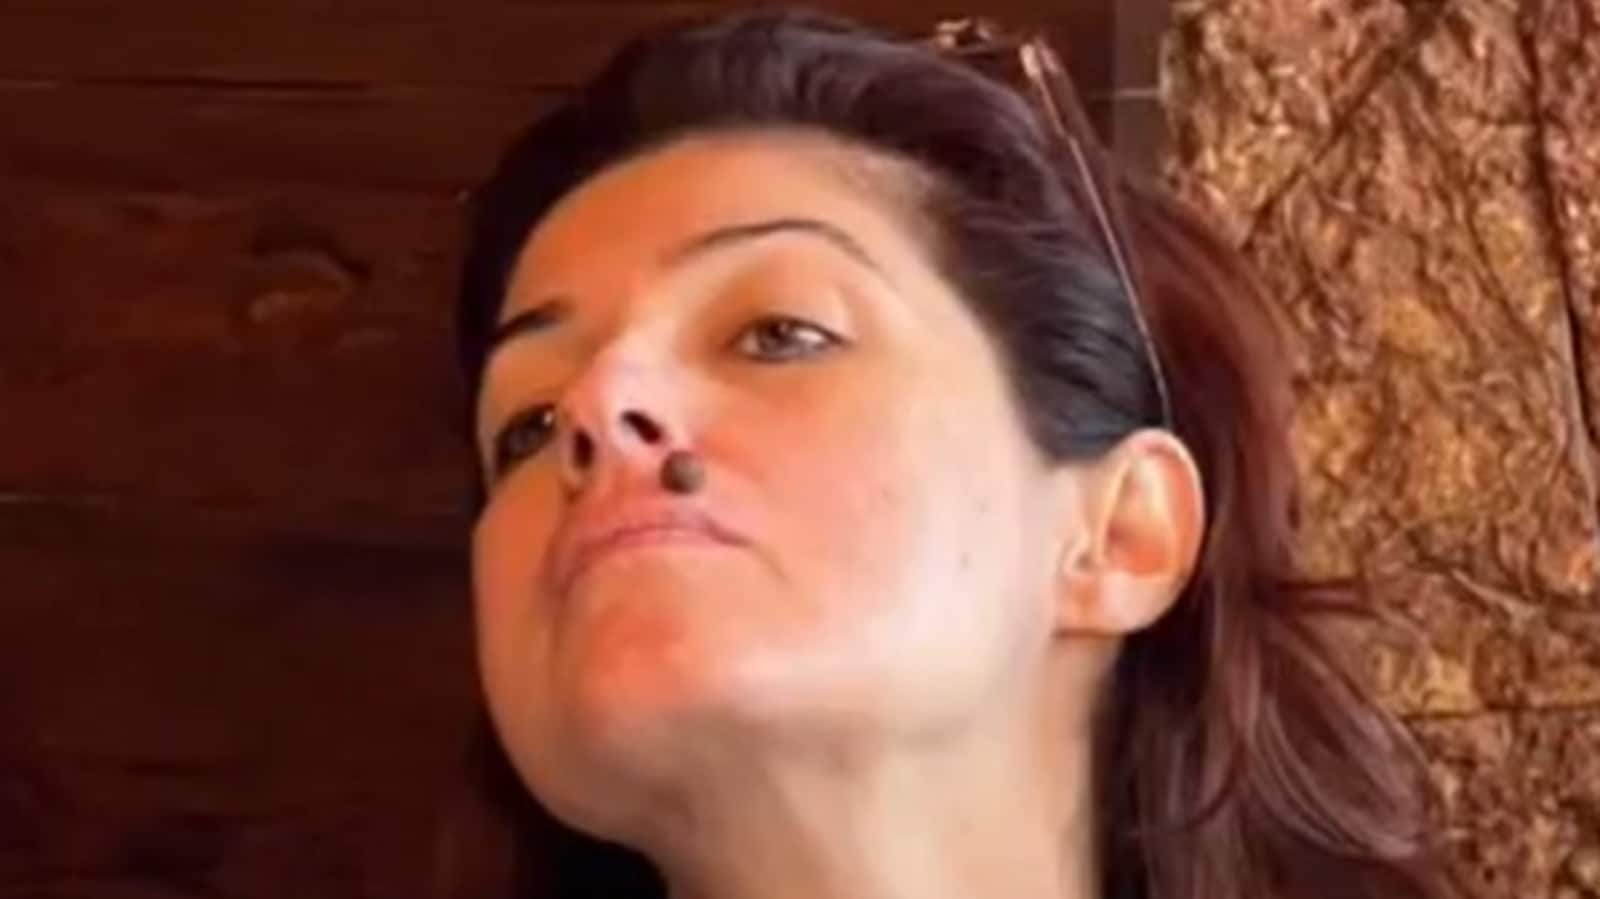 Twinkle Khanna shows the ‘mole’ above her lip, fans think it looks ‘bigger than her two nostrils combined’. See pic